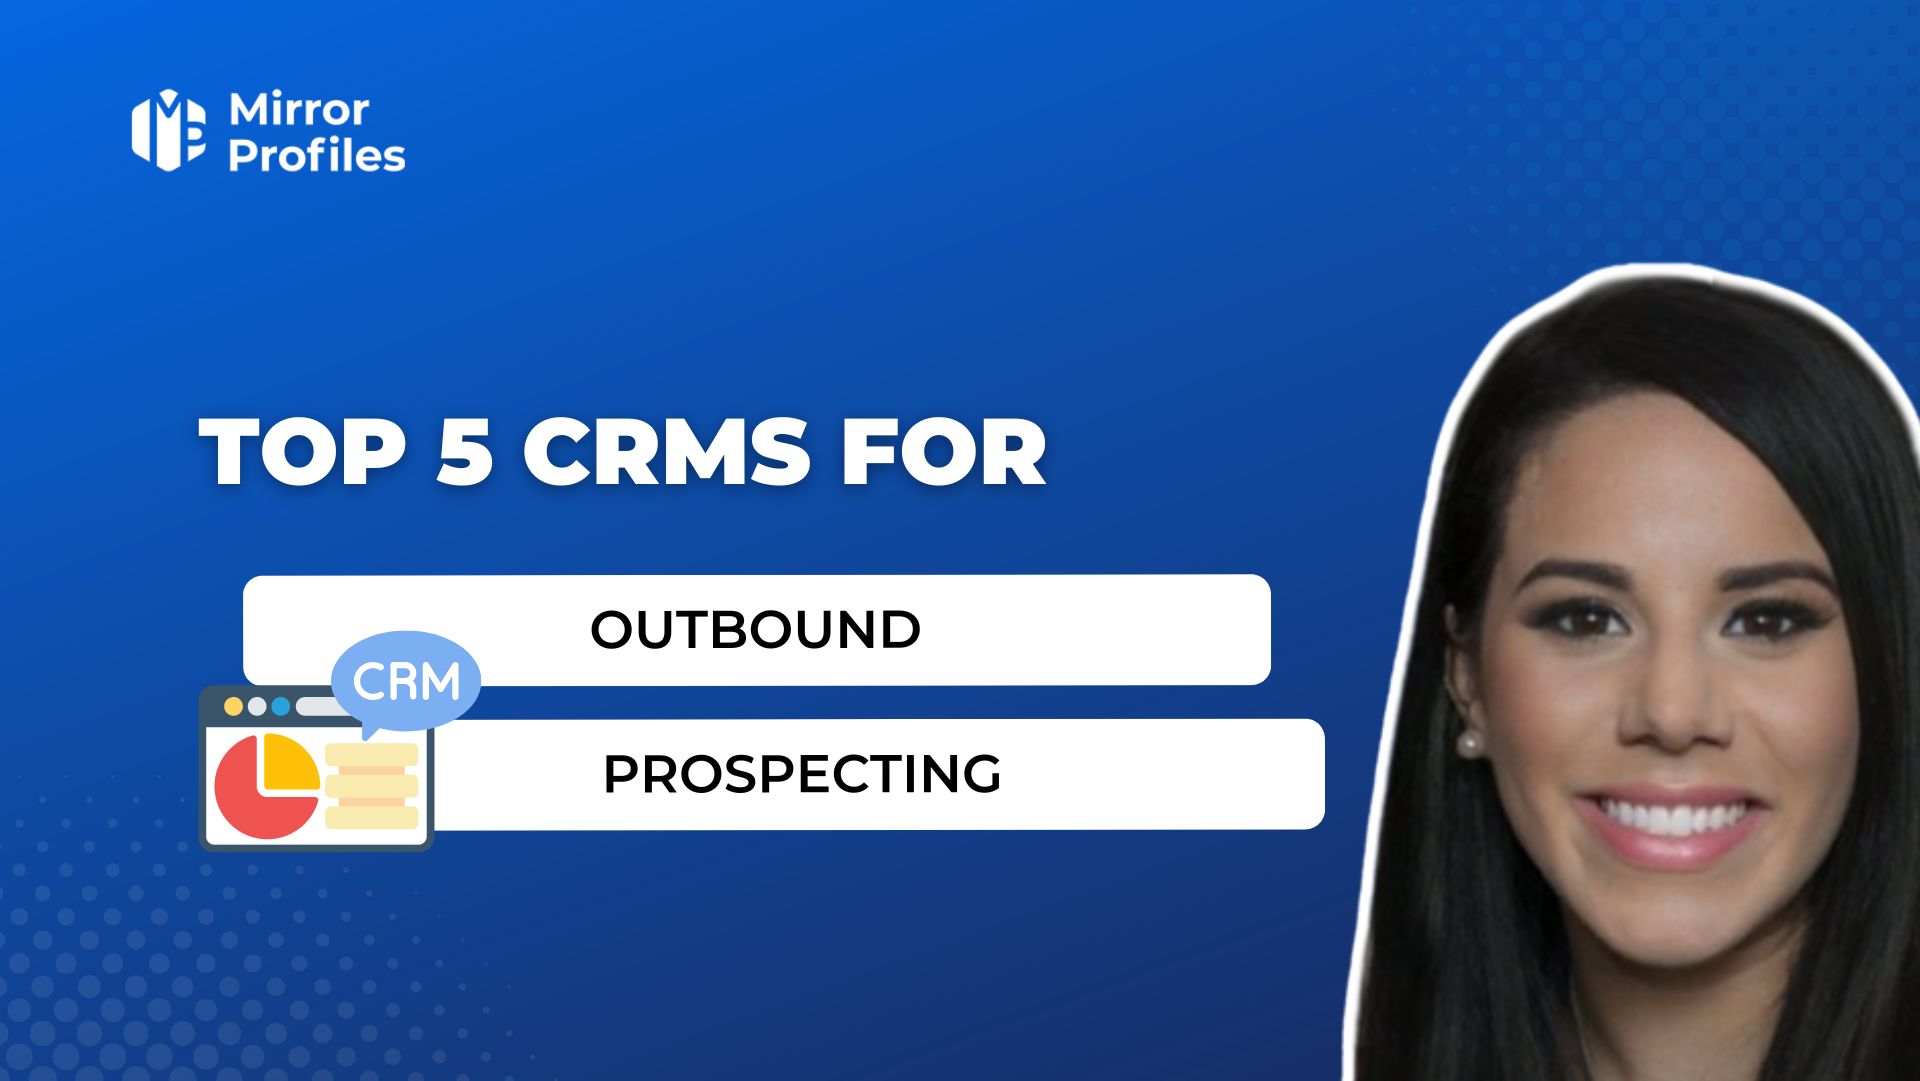 Top 5 CRMs for outbound prospecting